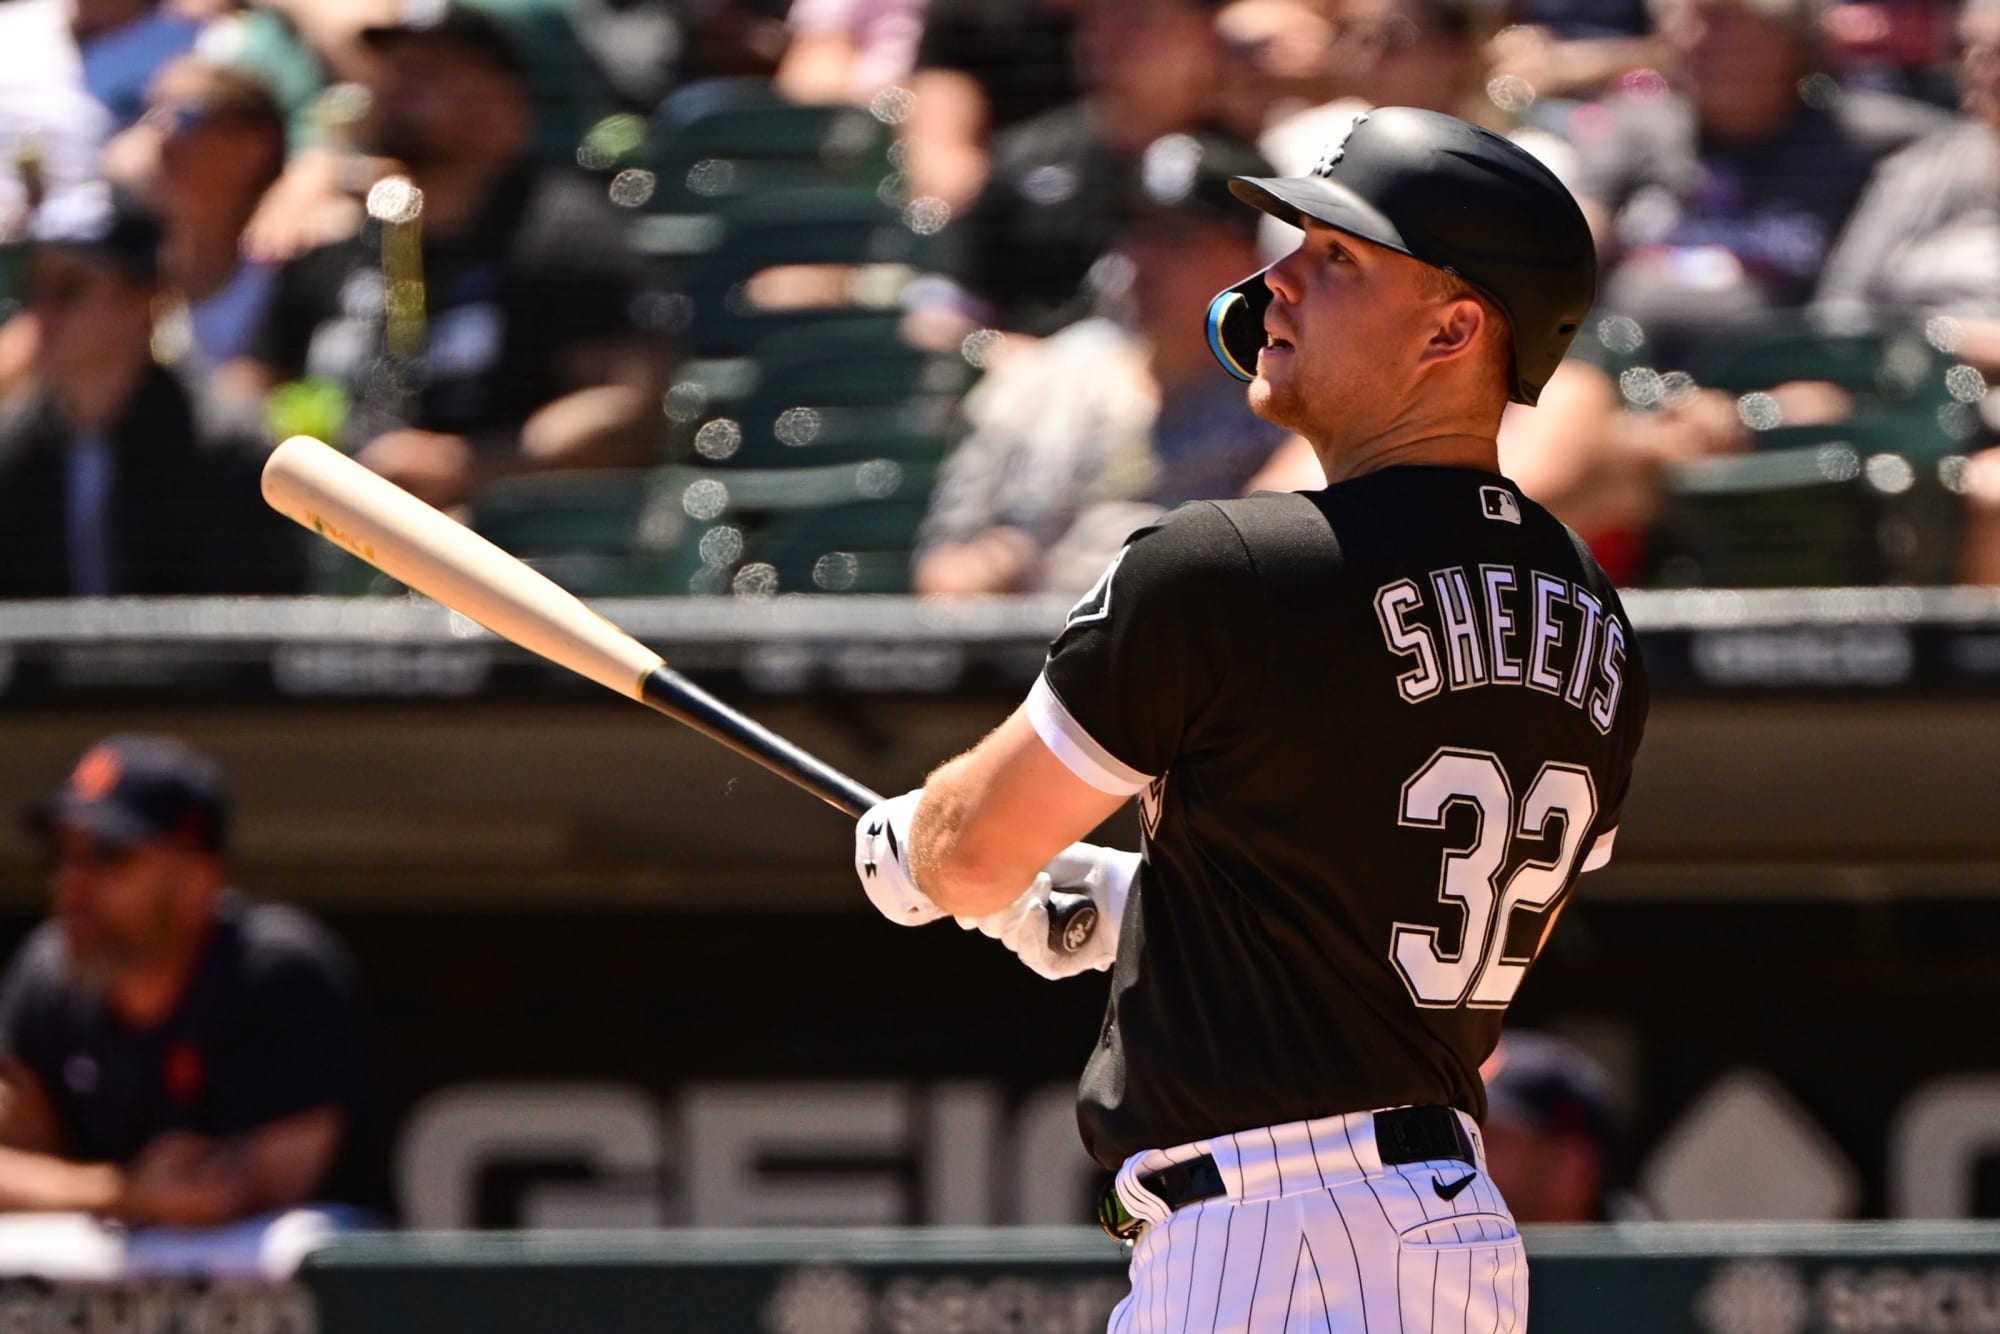 Gavin Sheets has been amazing since coming back to White Sox